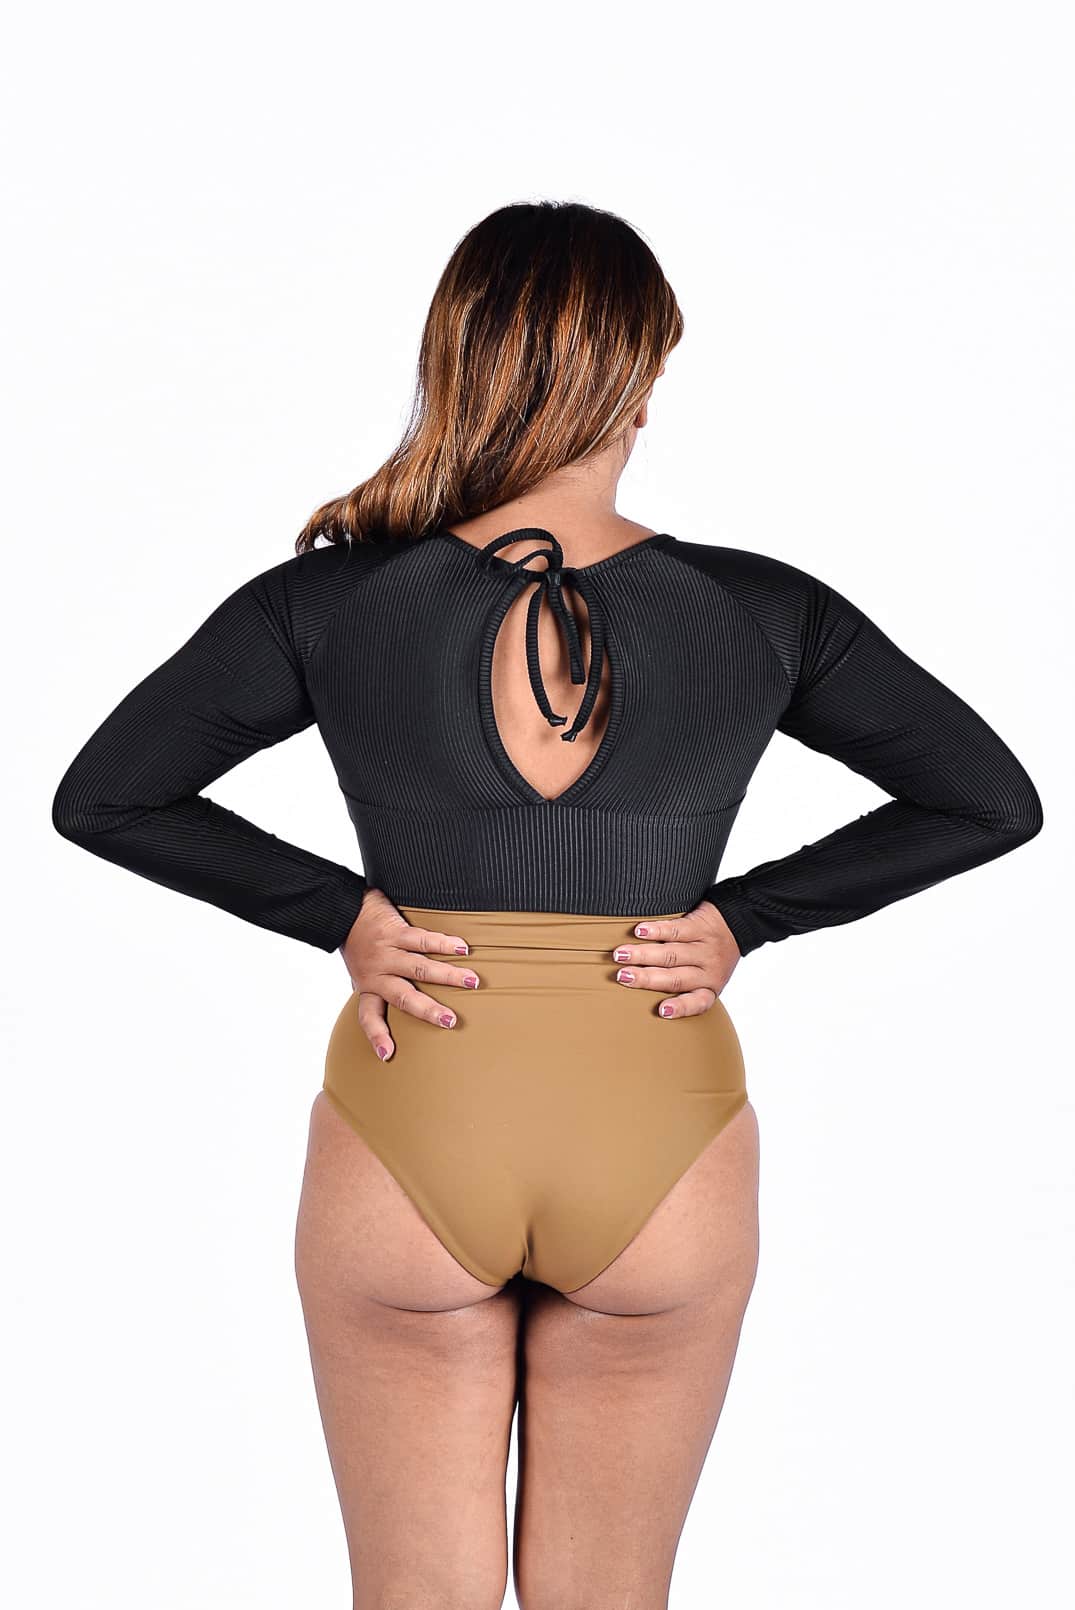 Ivy Surfsuit lovely crow/tan lines